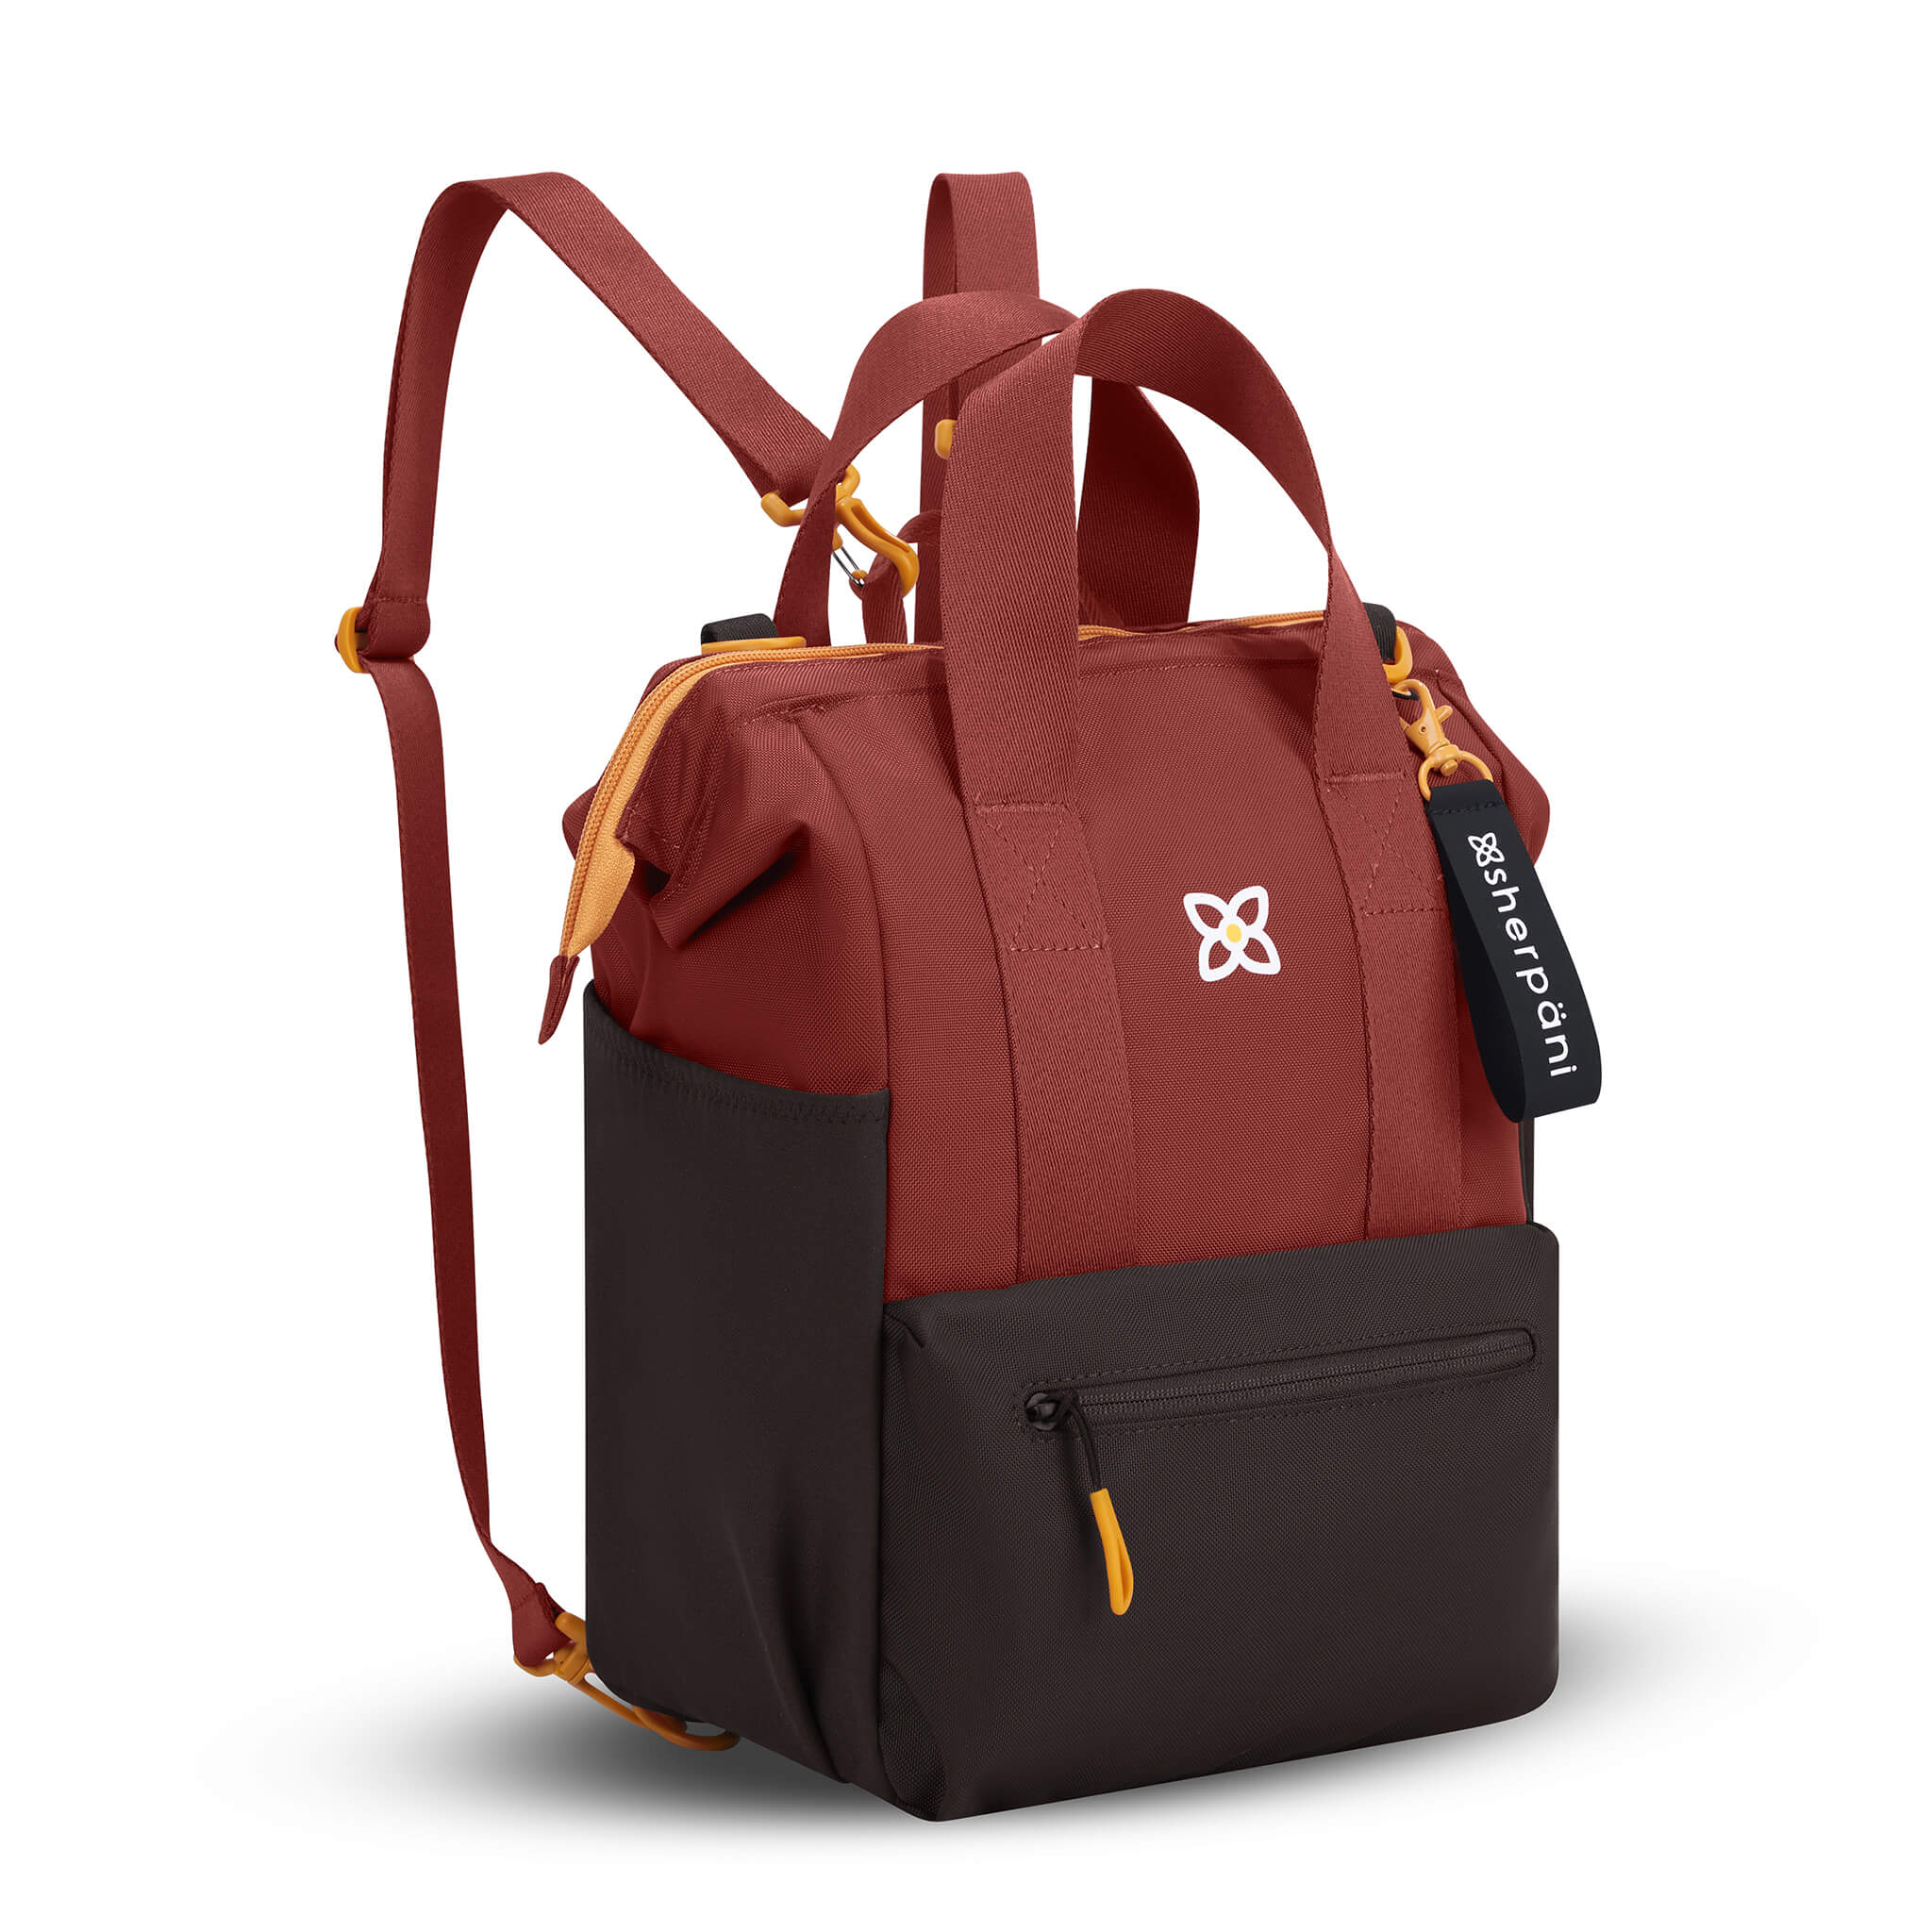 Angled front view of Sherpani convertible travel bag, the Dispatch in Cider. Dispatch features include external zipper pocket, three water bottle holders, fixed tote handles, removable straps, detachable straps, adjustable straps, padded laptop sleeve and a doctor bag opening. The Cider color is two-toned in burgundy and dark brown with accents in yellow.